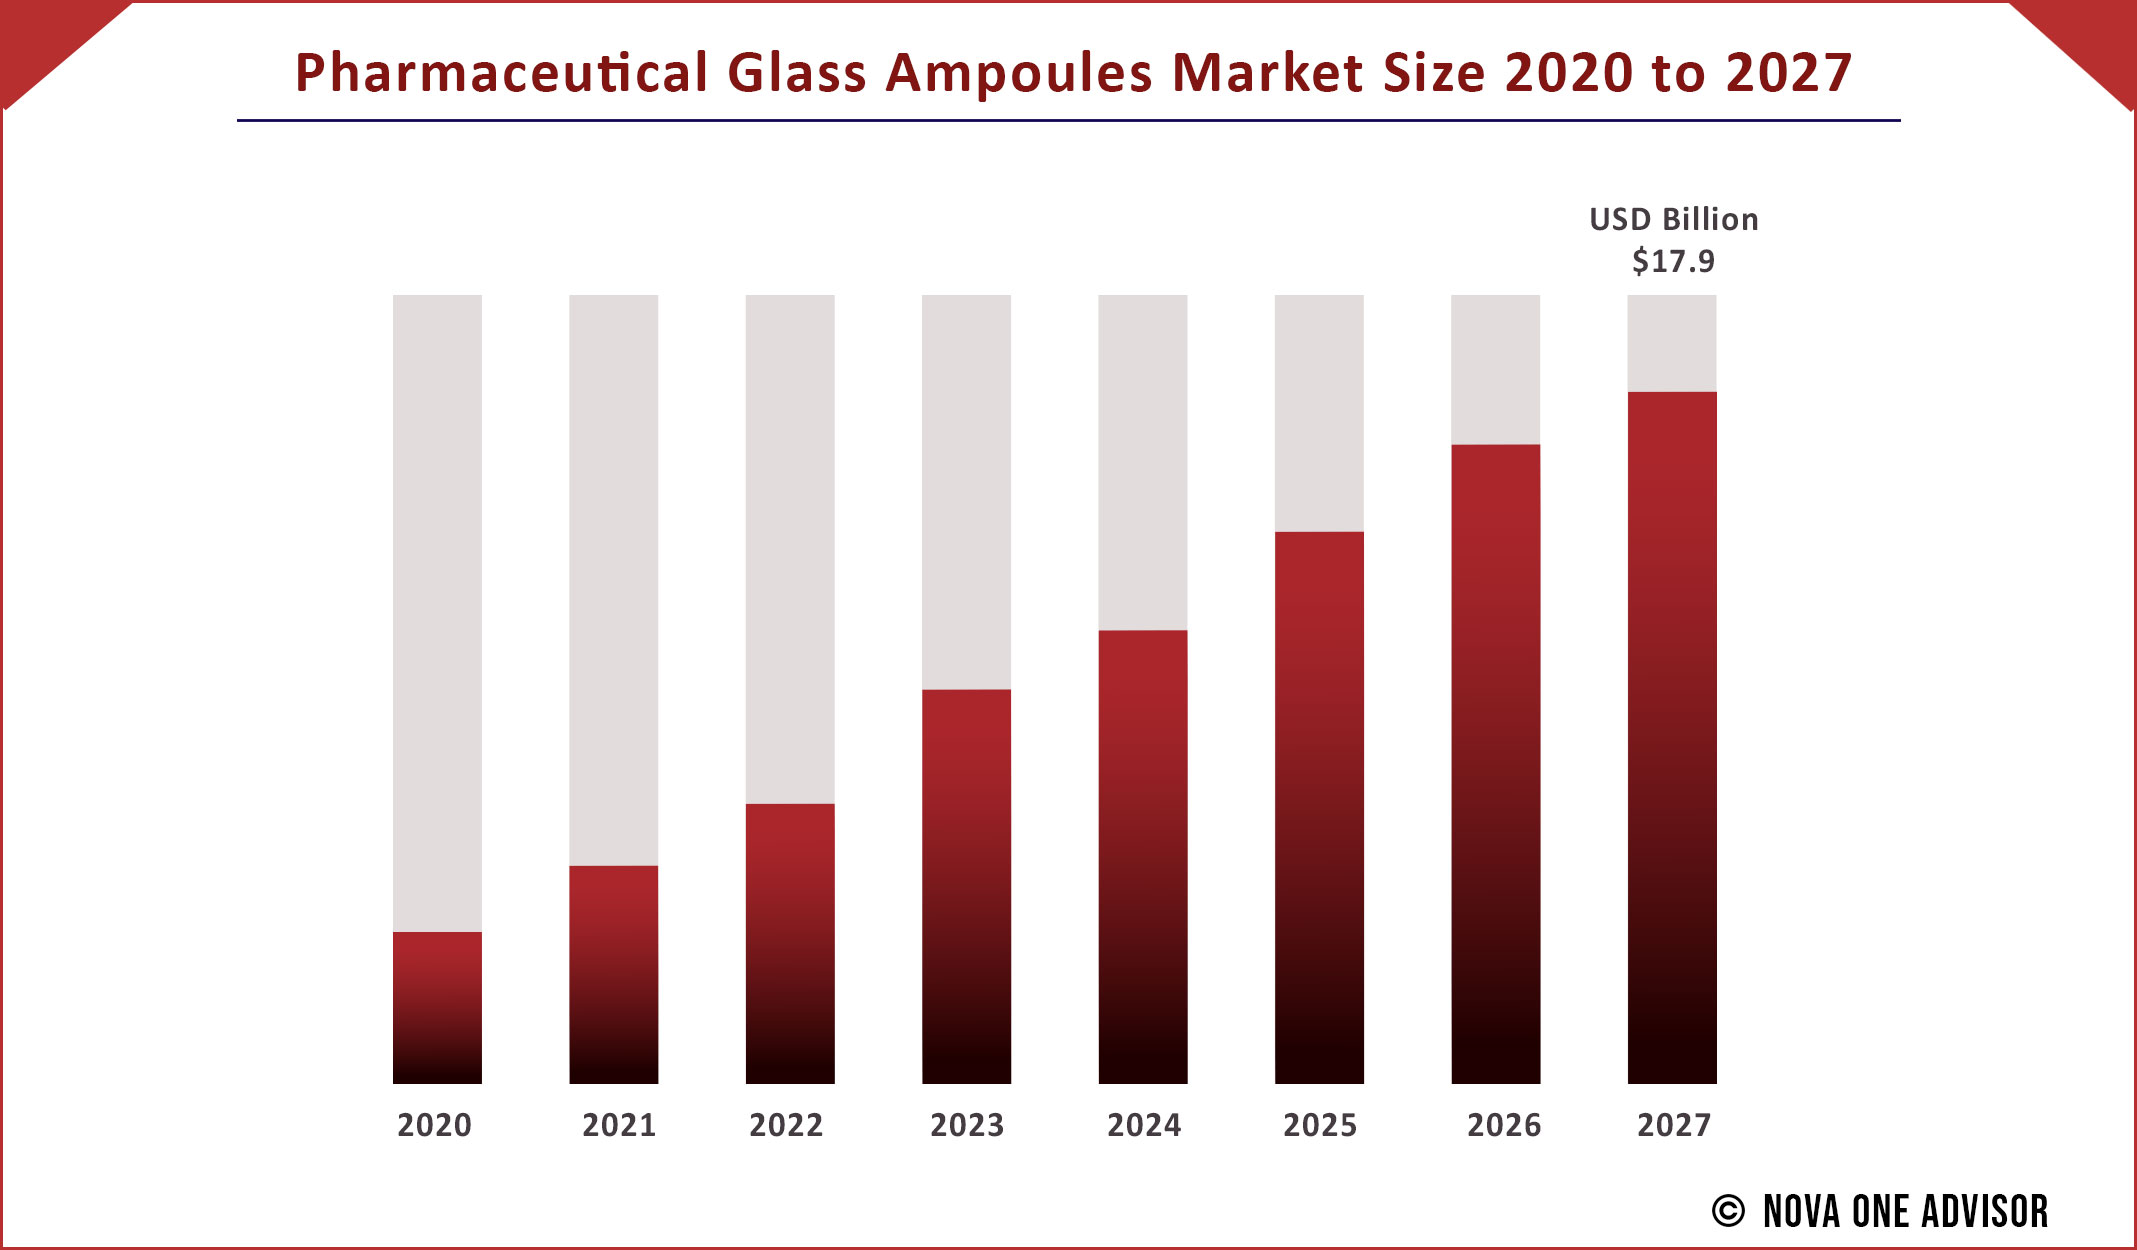 Pharmaceutical Glass Ampoules Market Size 2020 to 2027